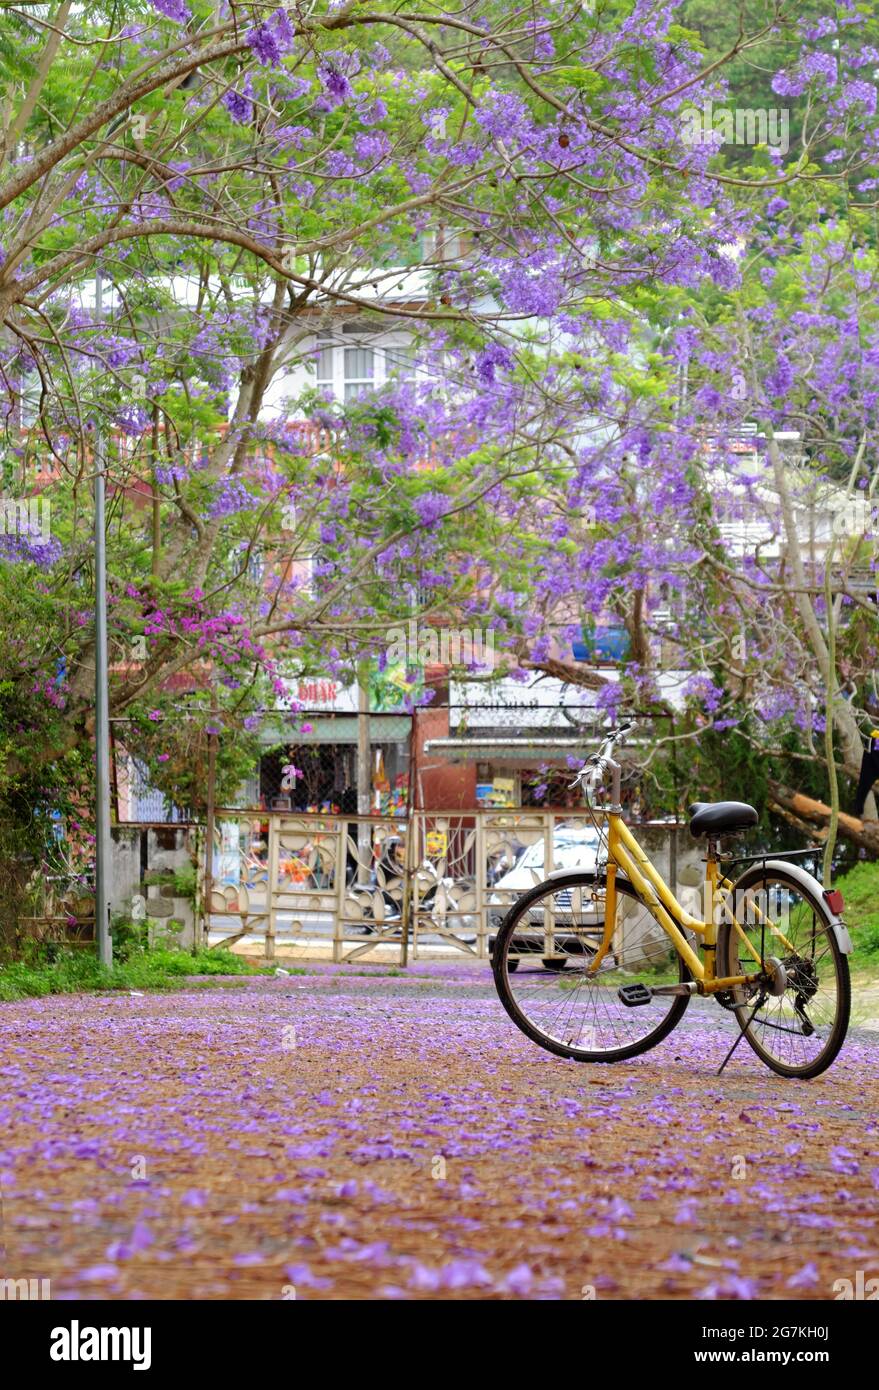 Beautiful landscape at Da Lat city, Vietnam in springtime,violet phoenix flower fall on way, yellow bicycle park alone on road under flamboyant tree Stock Photo